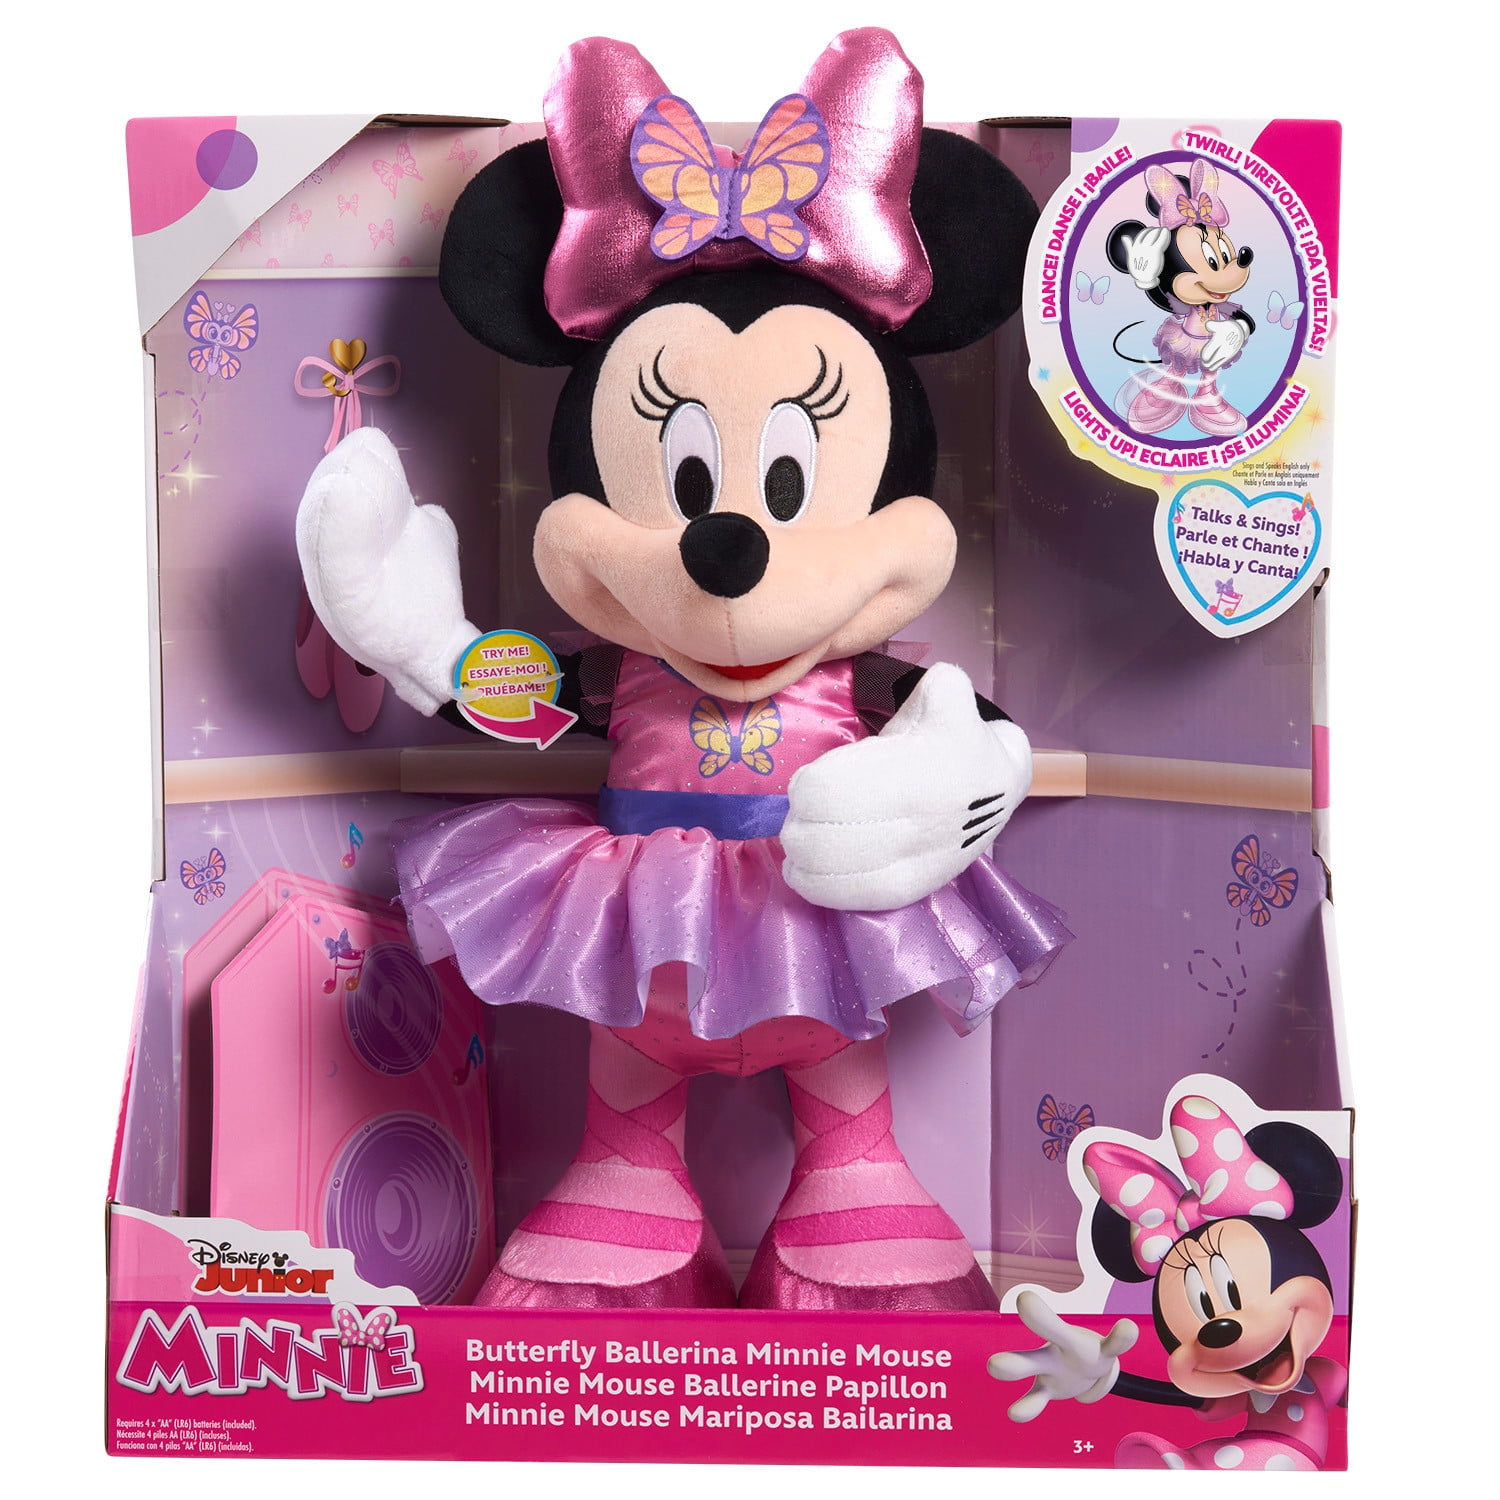 Disney Junior Minnie Mouse 40 Inch Giant Plush Minnie Mouse Stuffed Animal  for Kids, Officially Licensed Kids Toys for Ages 2 Up by Just Play